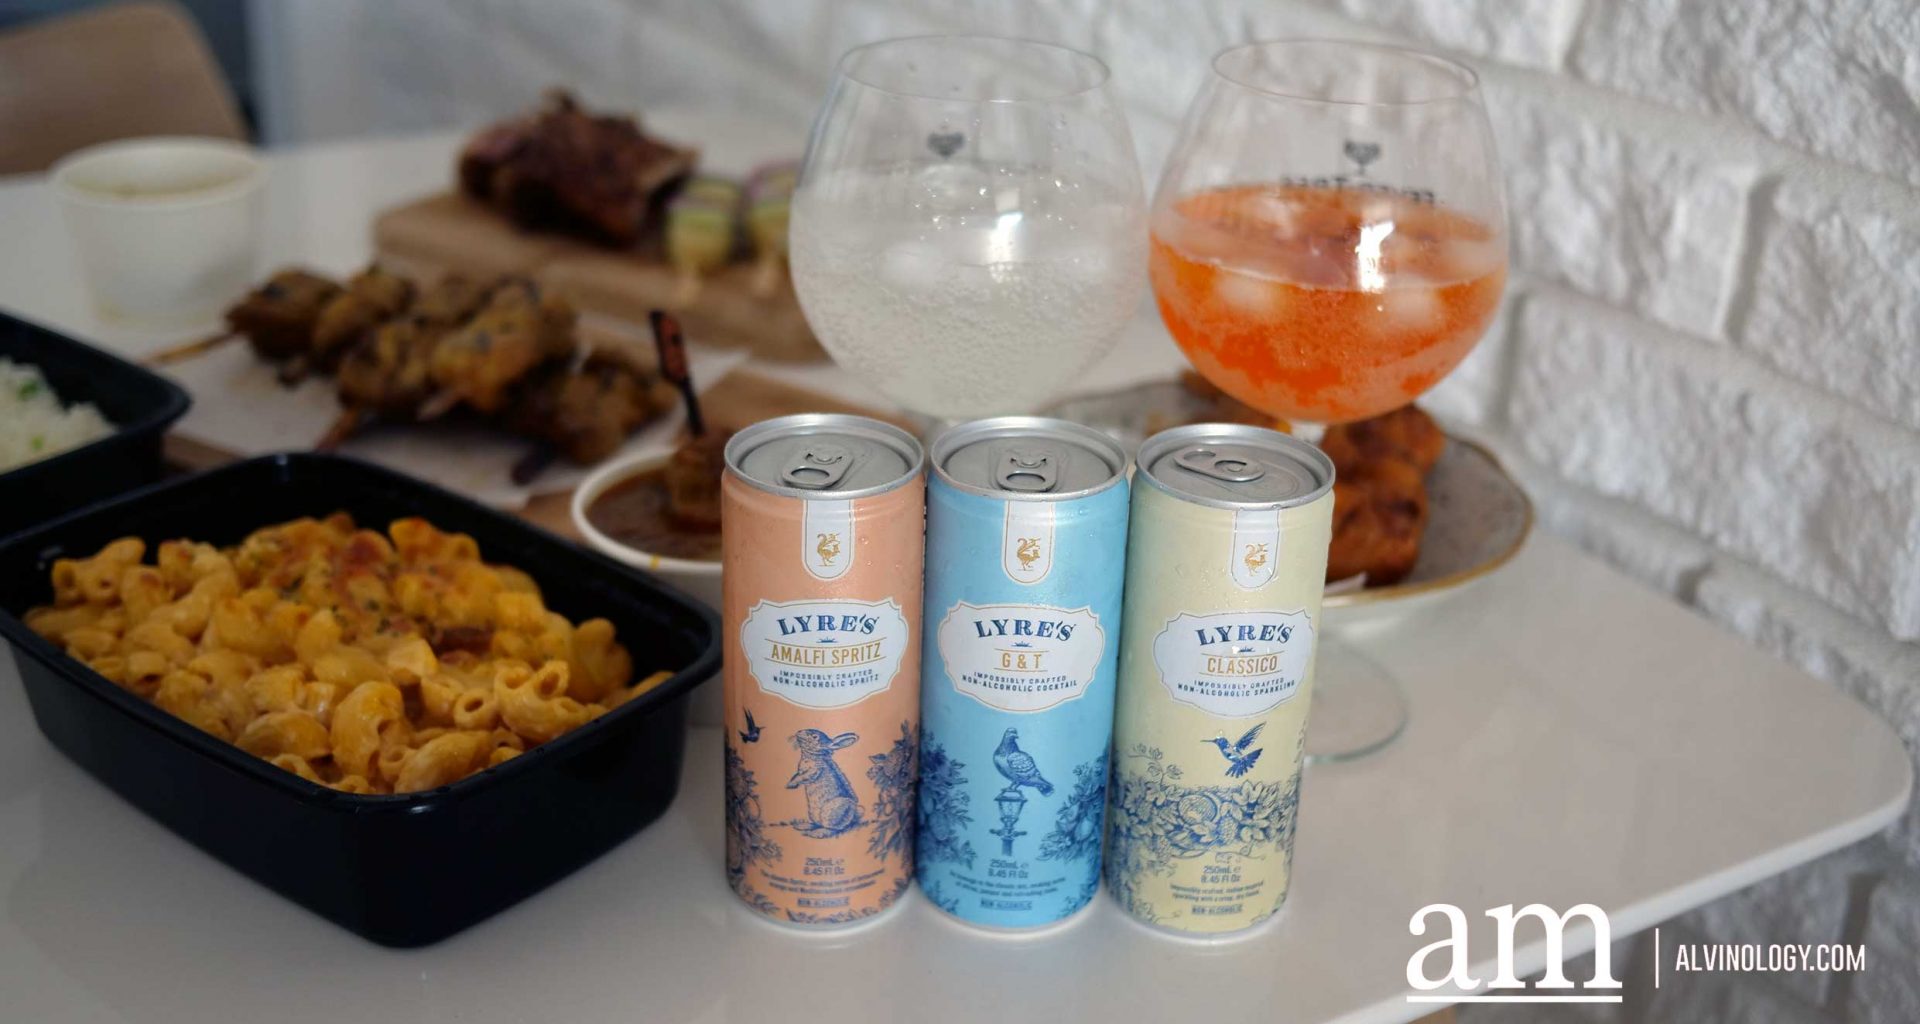 Non-alcoholic Ready-to-drink cocktails from Lyre's to Chill at home - Alvinology